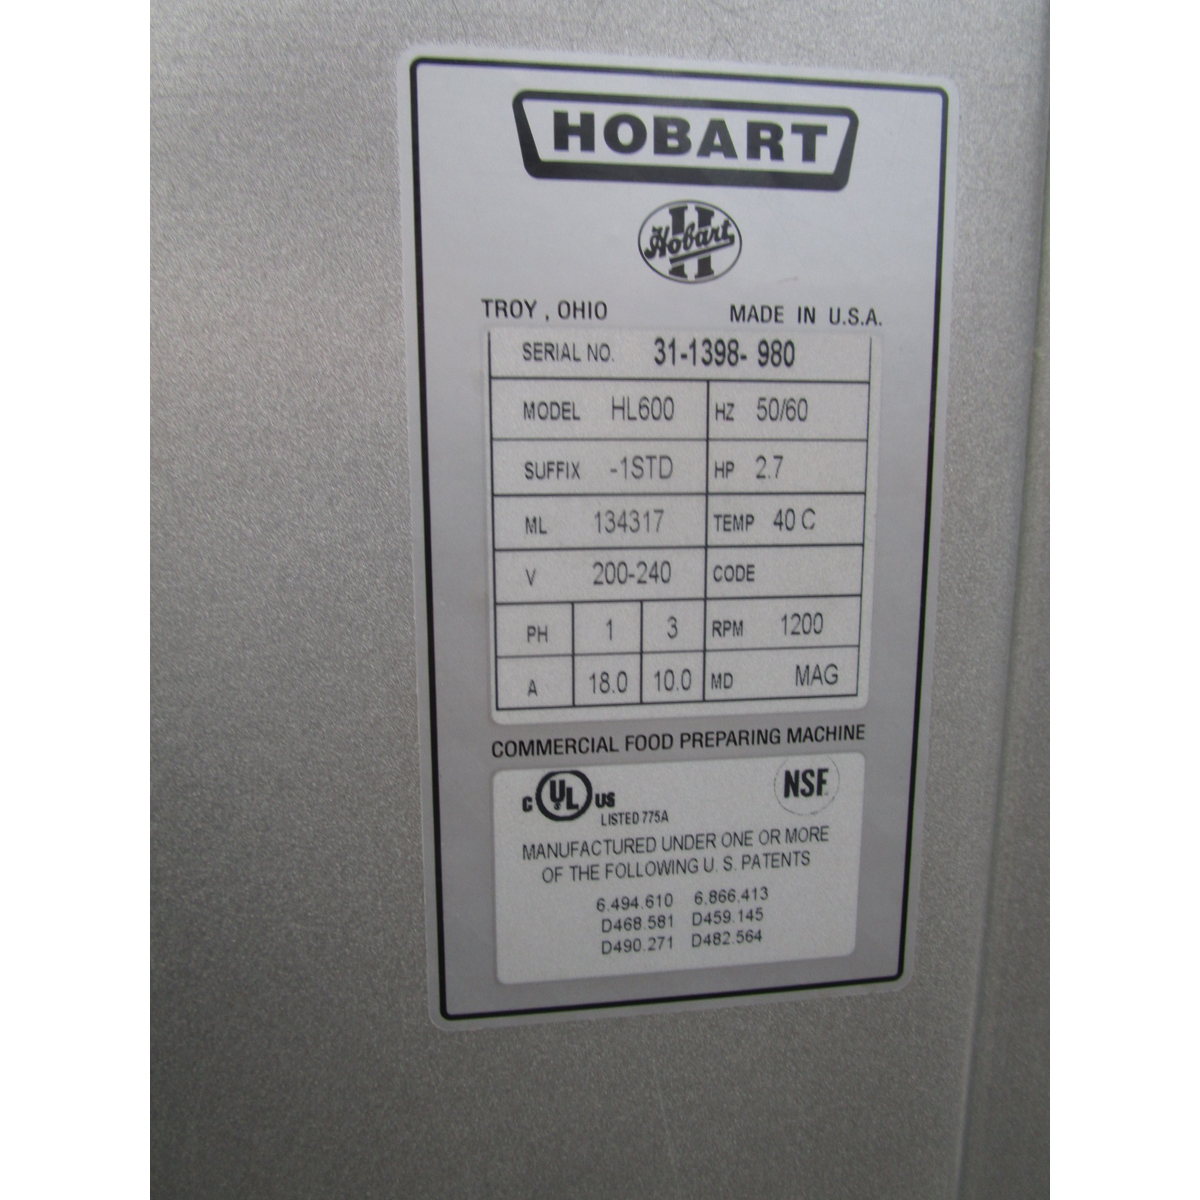 Hobart 60 Quart HL600 Legacy Mixer with Bowl Guard, Excellent Condition image 4